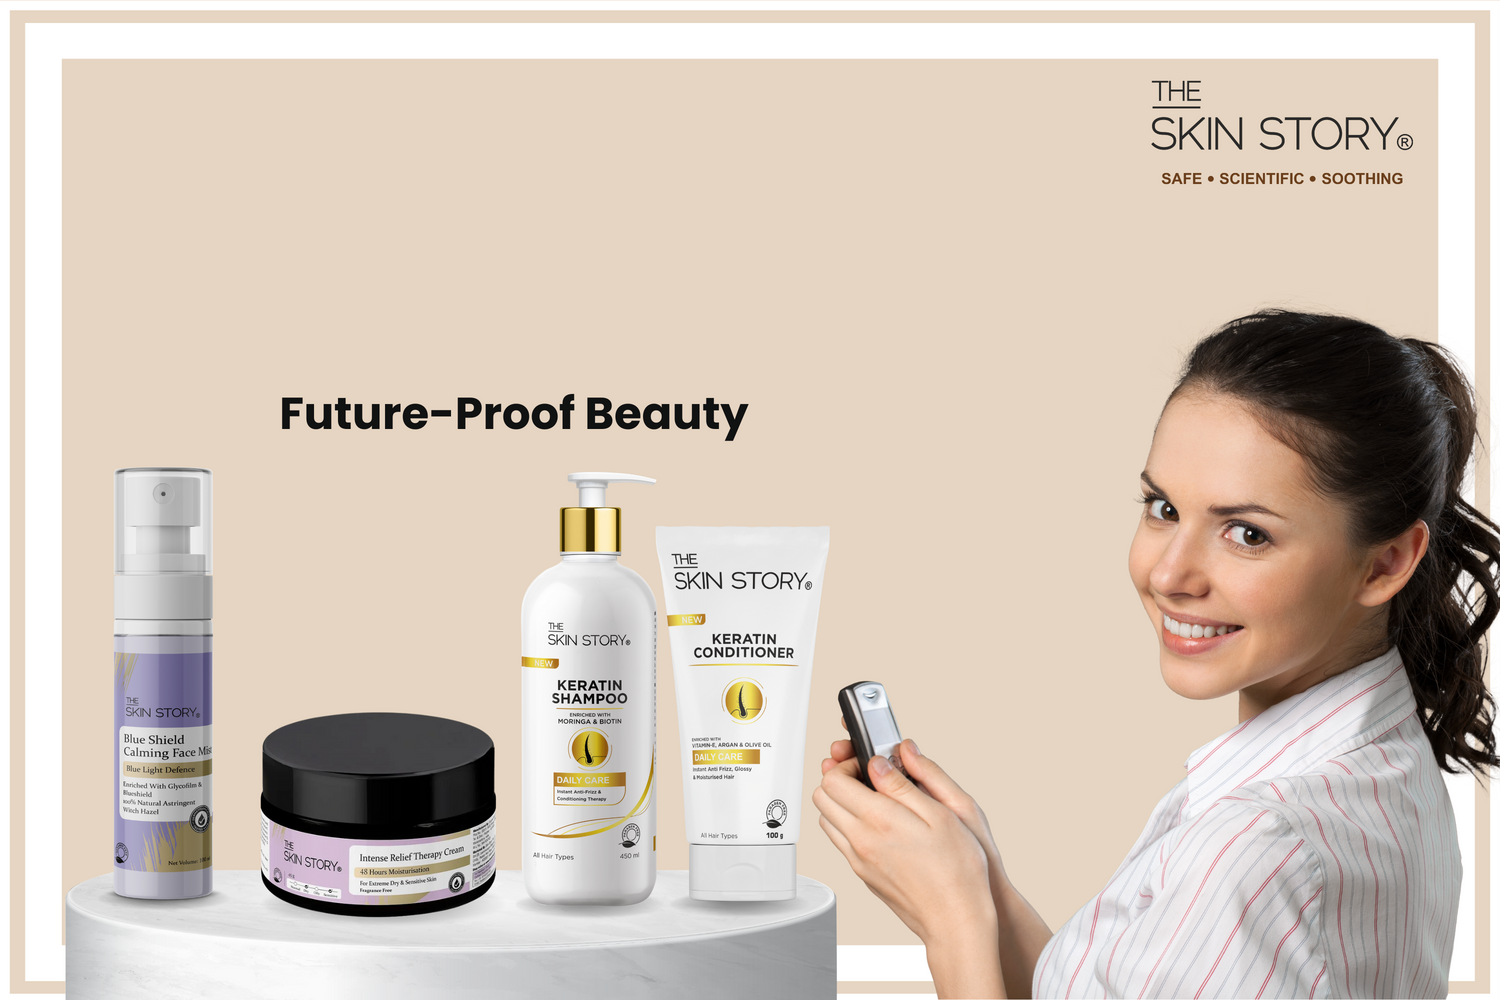 Future-Proof Beauty: Anticipated Skin and Hair Issues